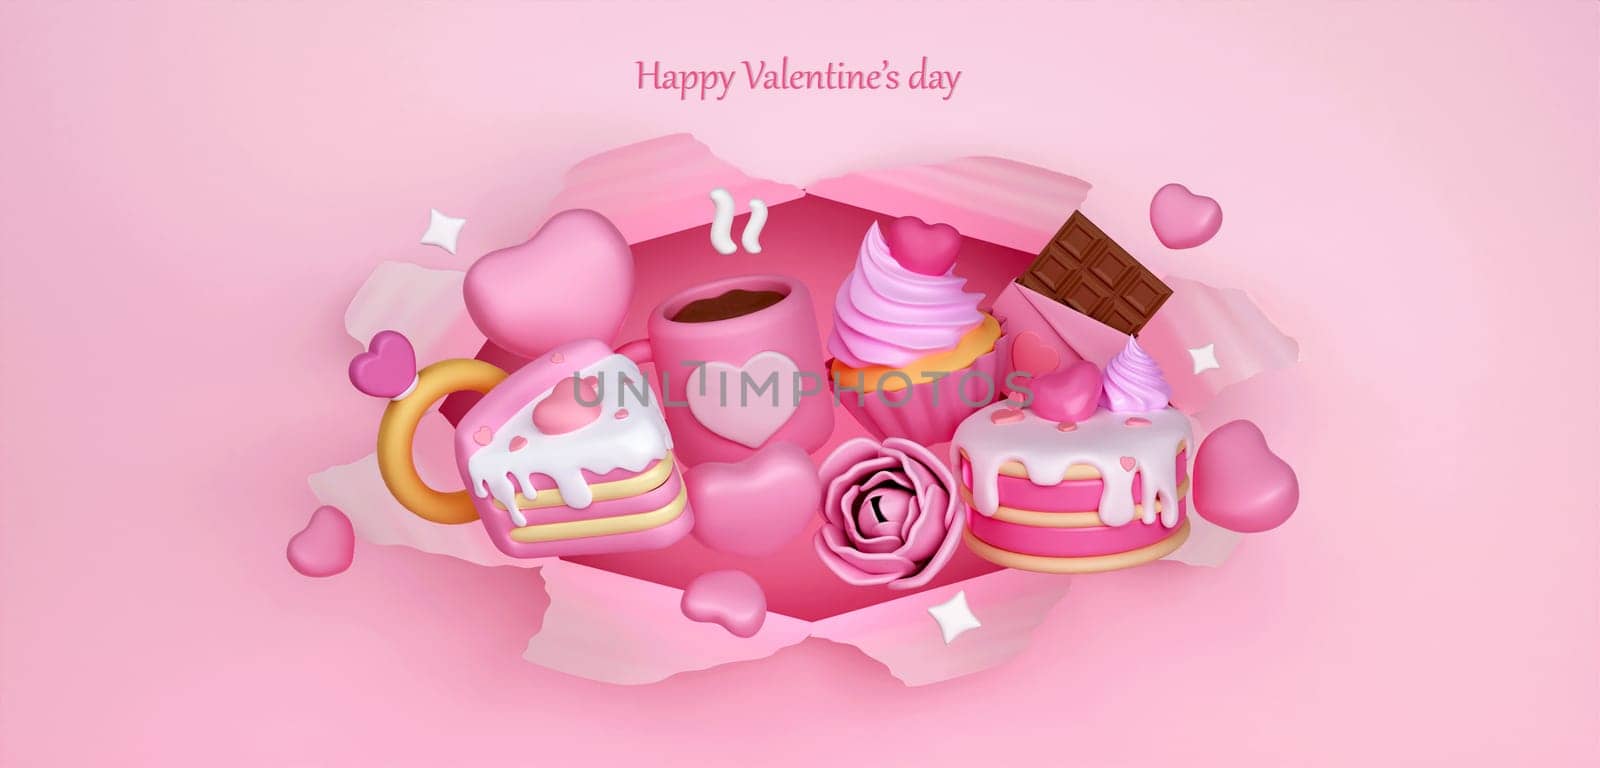 Pink heart, cup cake, chocolate, and rose on background. Valentine Wallpaper with Pink love hearts. 3D rendering illustration by meepiangraphic